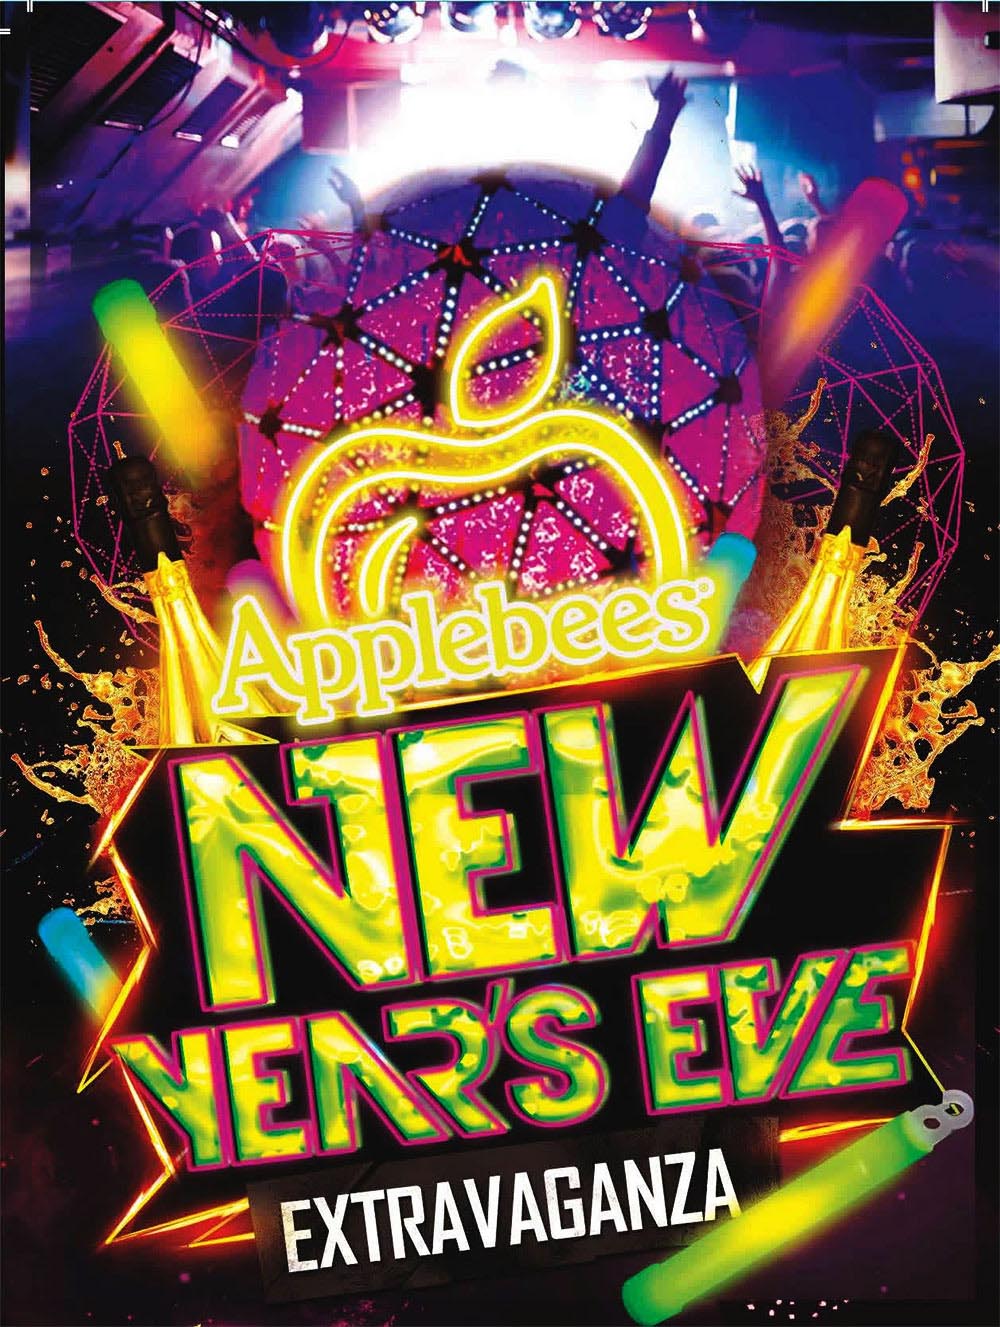 Applebee's NYC Times Square New Years Eve 2025